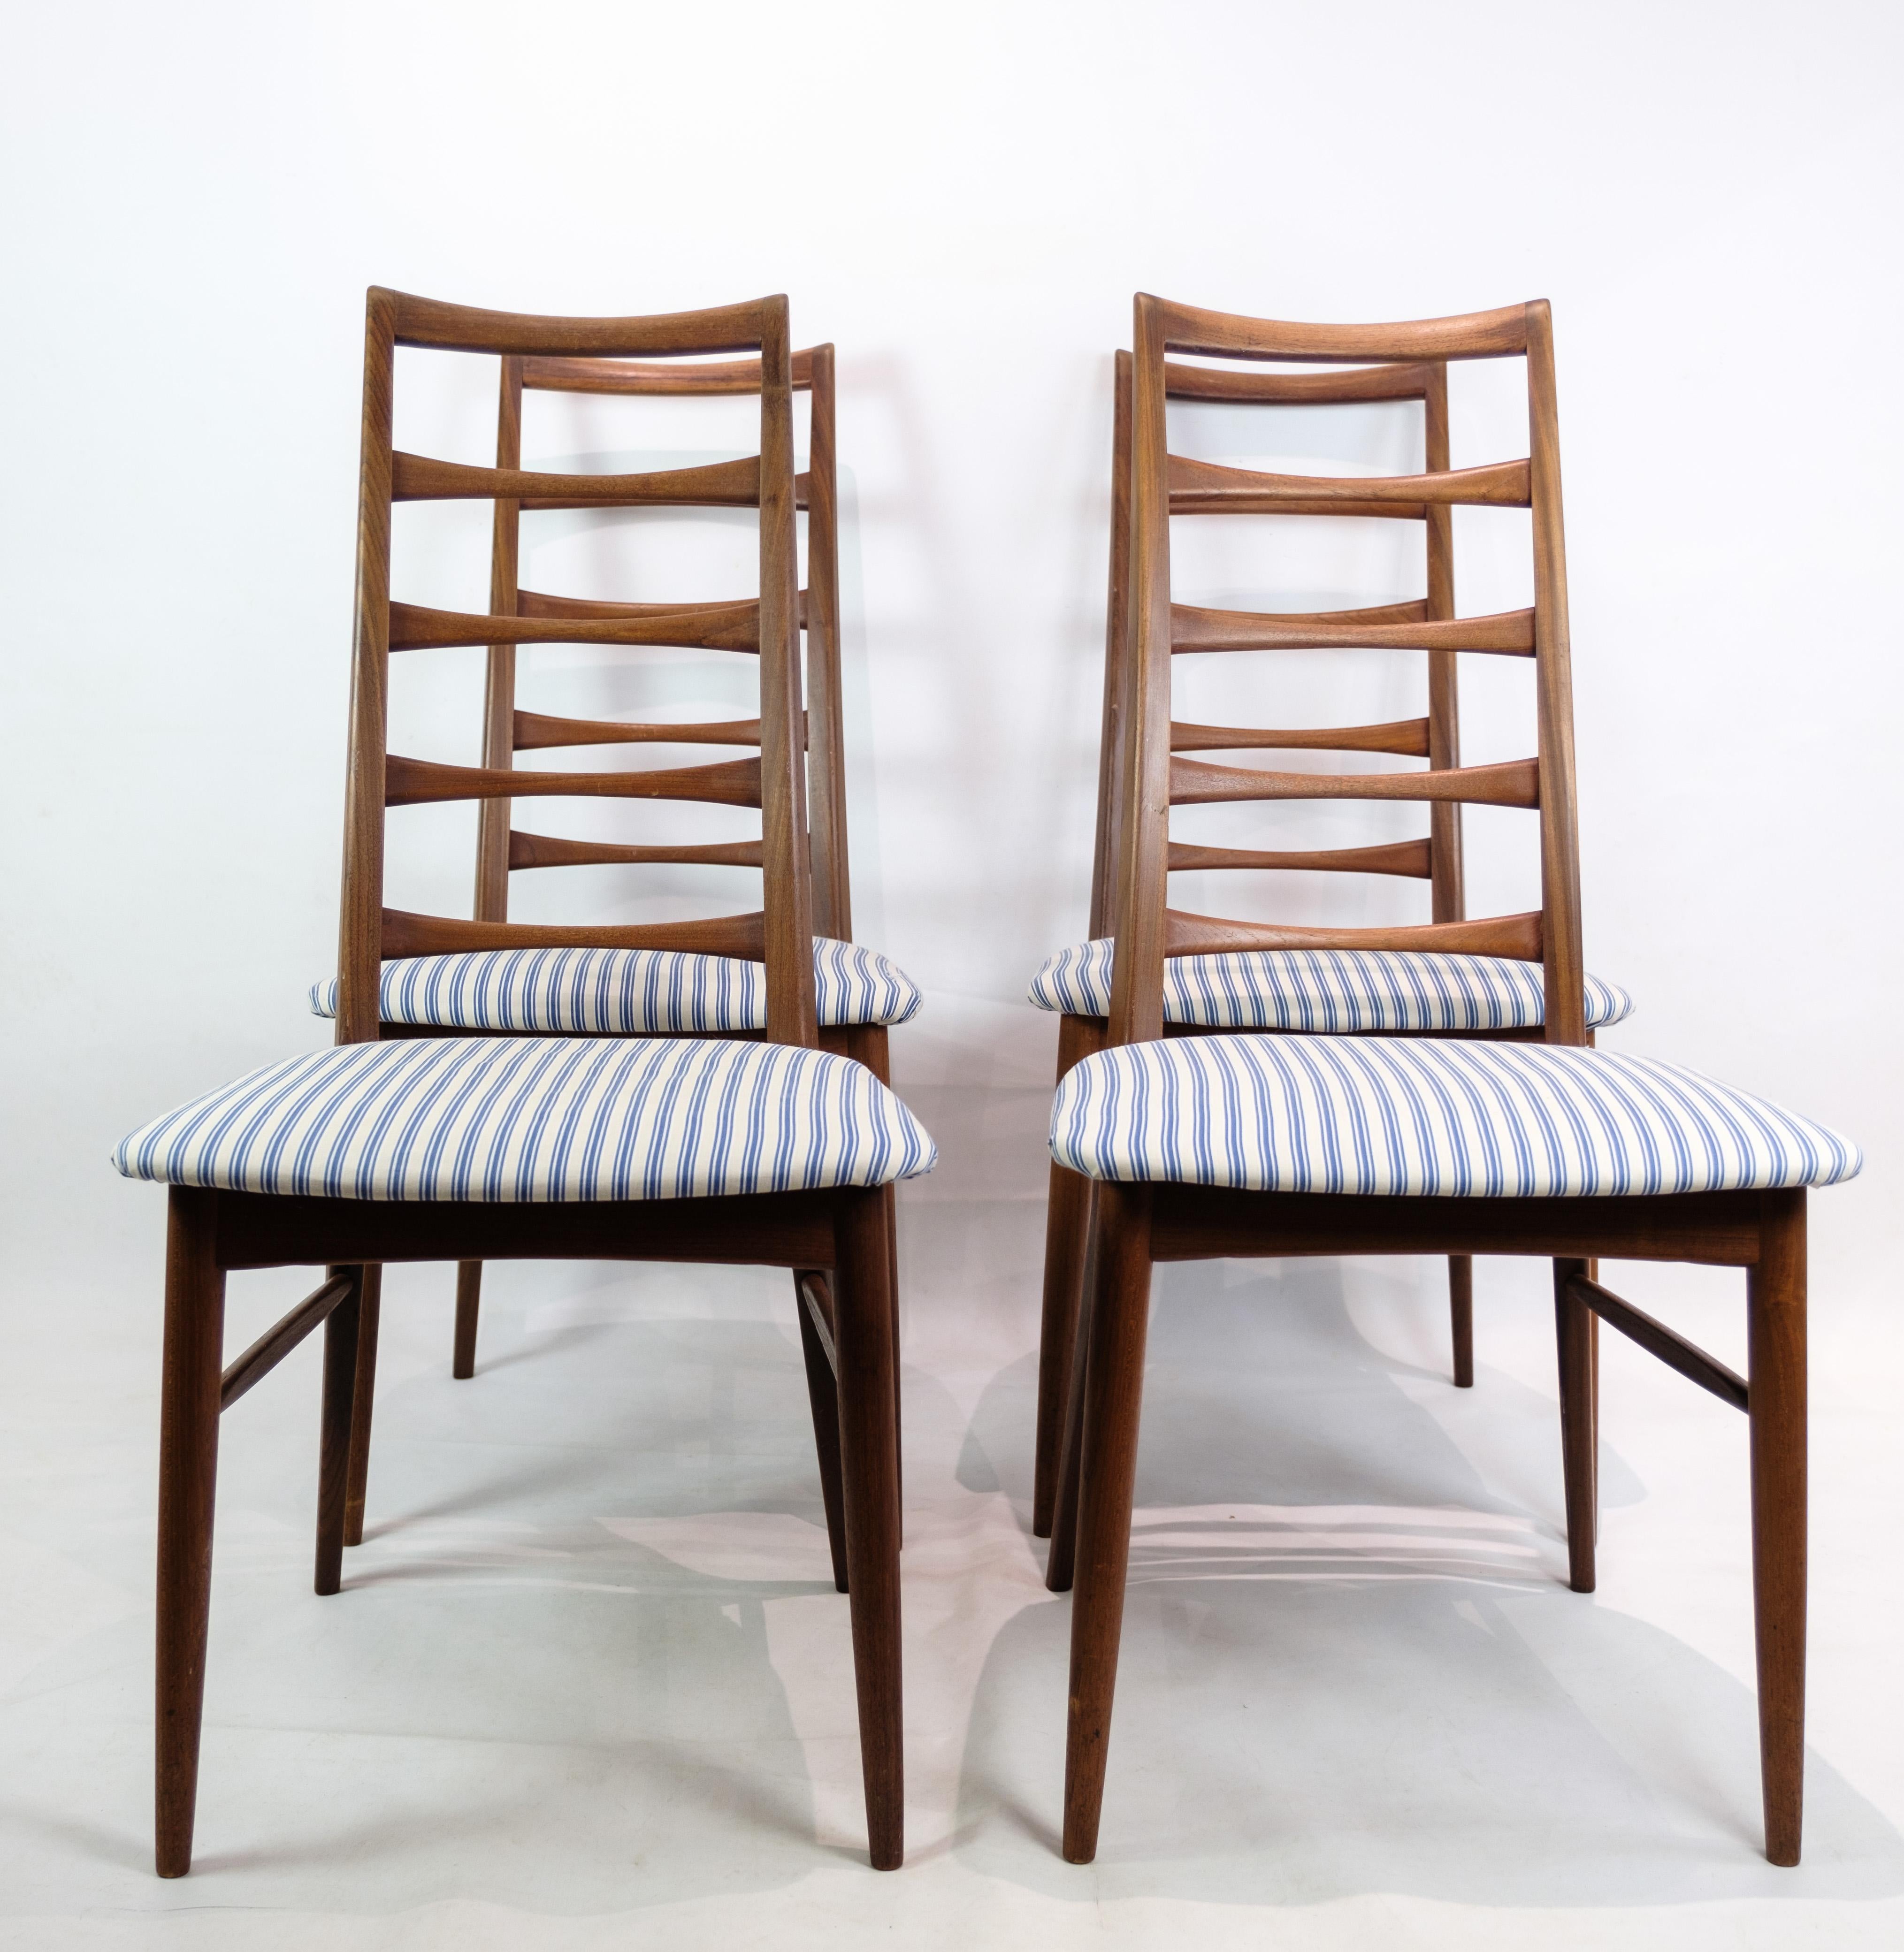 This set of four chairs, known as model 